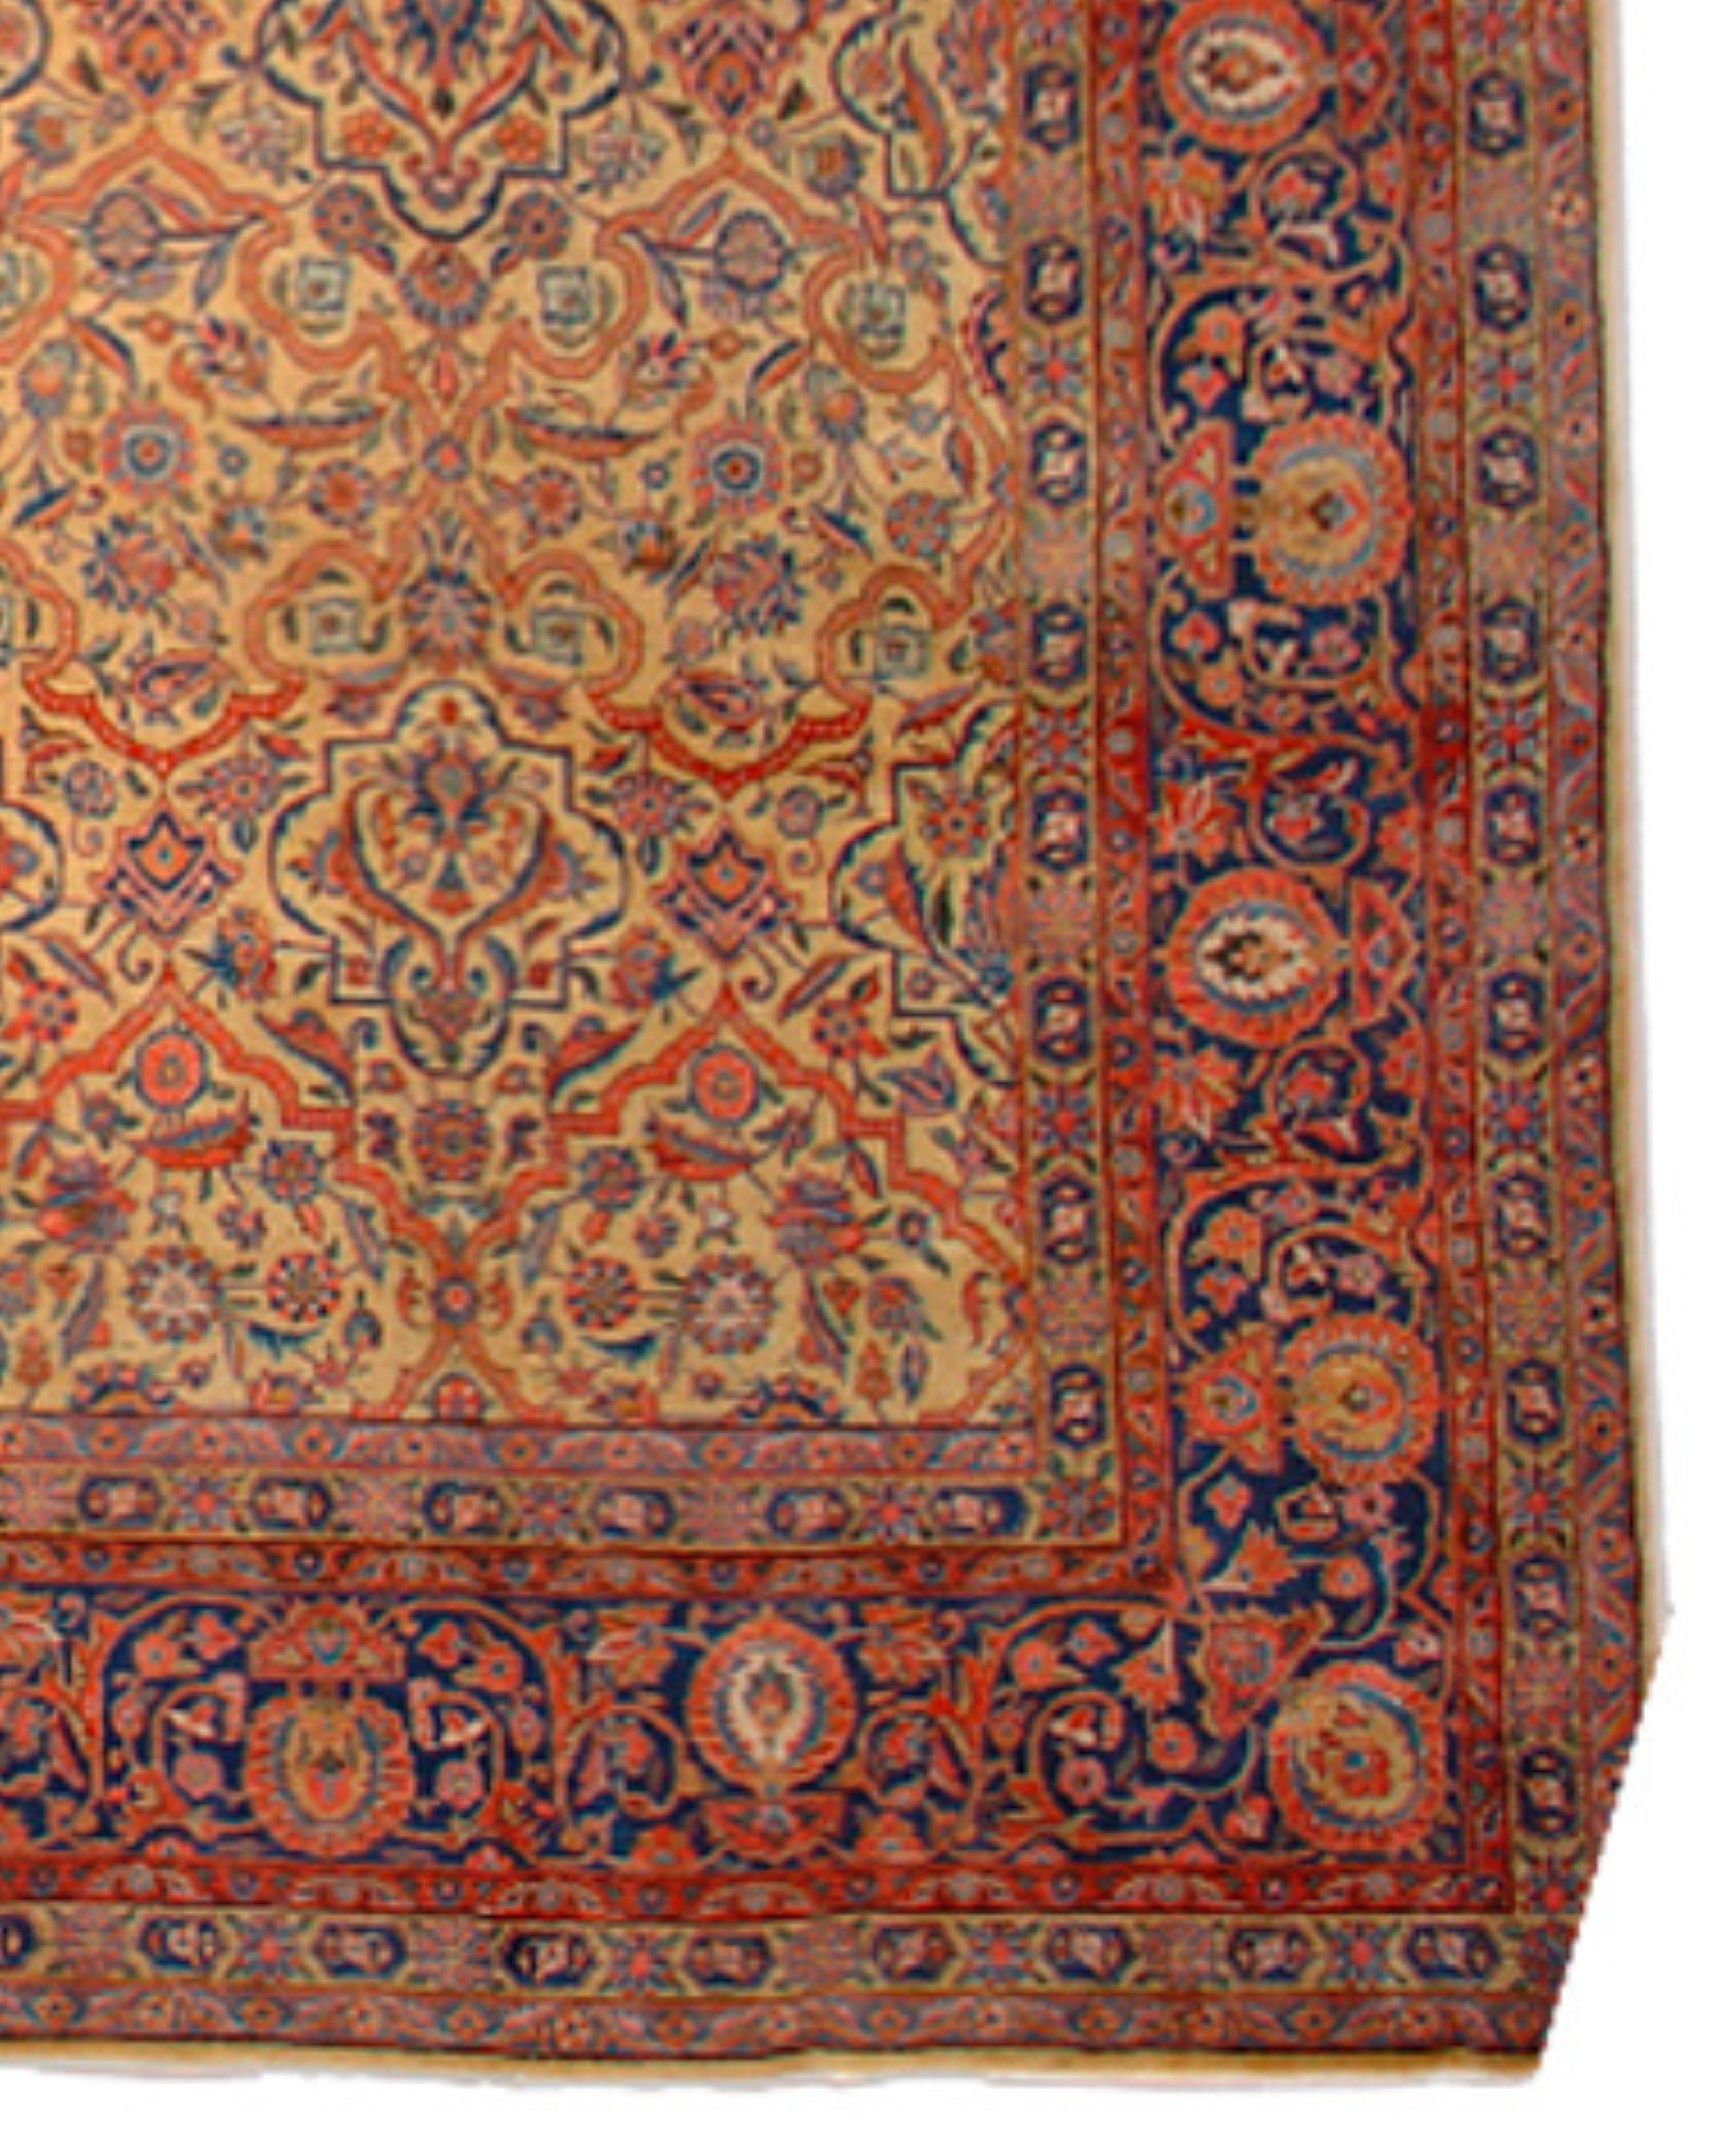 Wool Antique Large Persian Kashan Rug, Early 20th Century For Sale